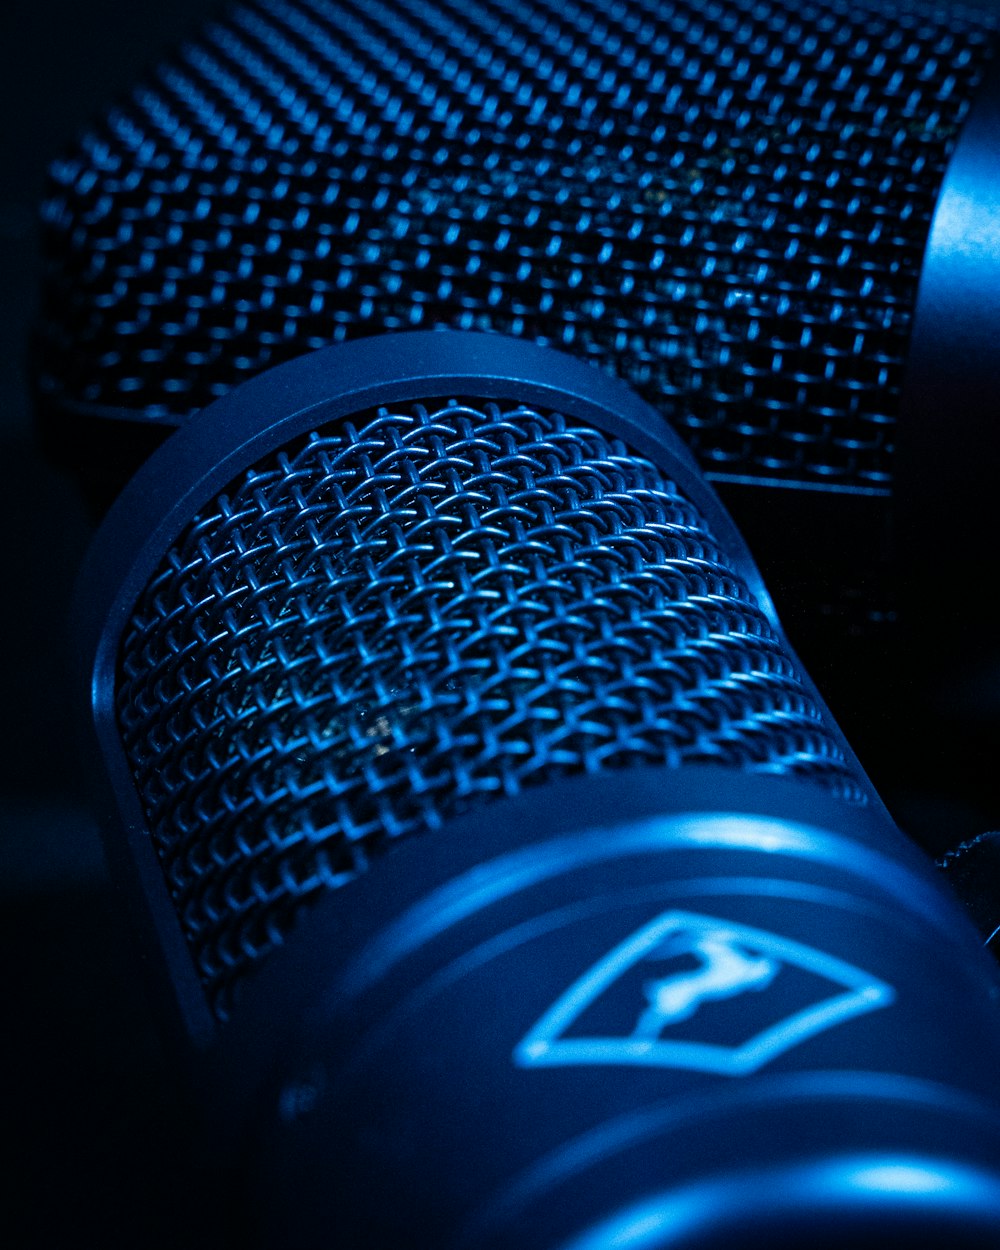 a close up of a microphone on a table